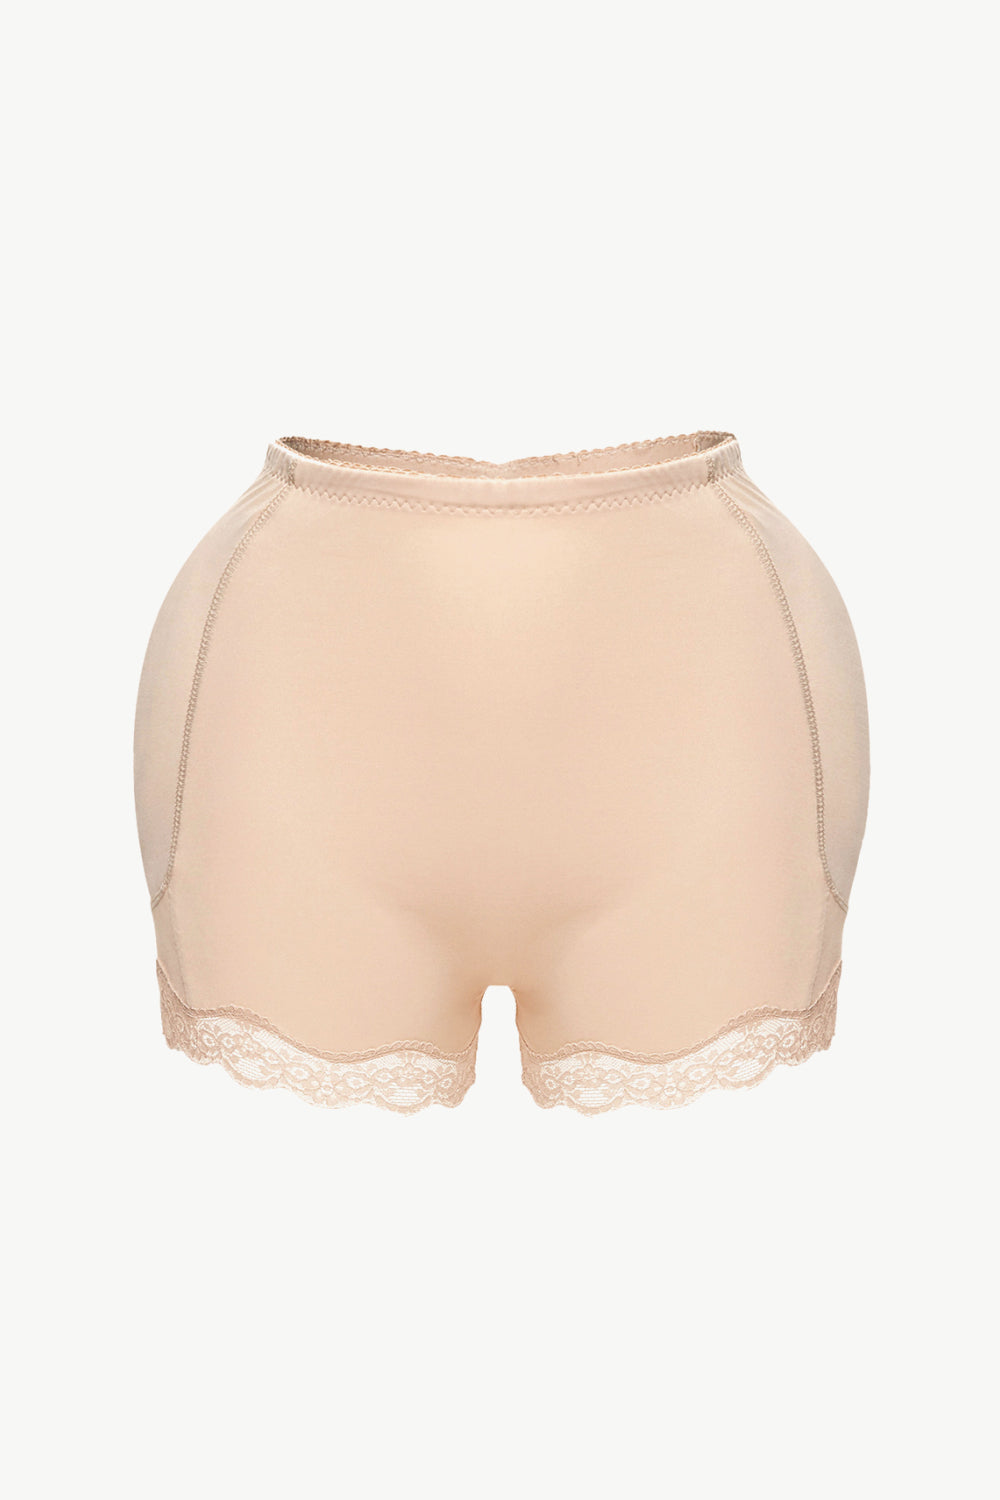 Full Size Lace Trim Shaping Shorts - Apricot / S Wynter 4 All Seasons